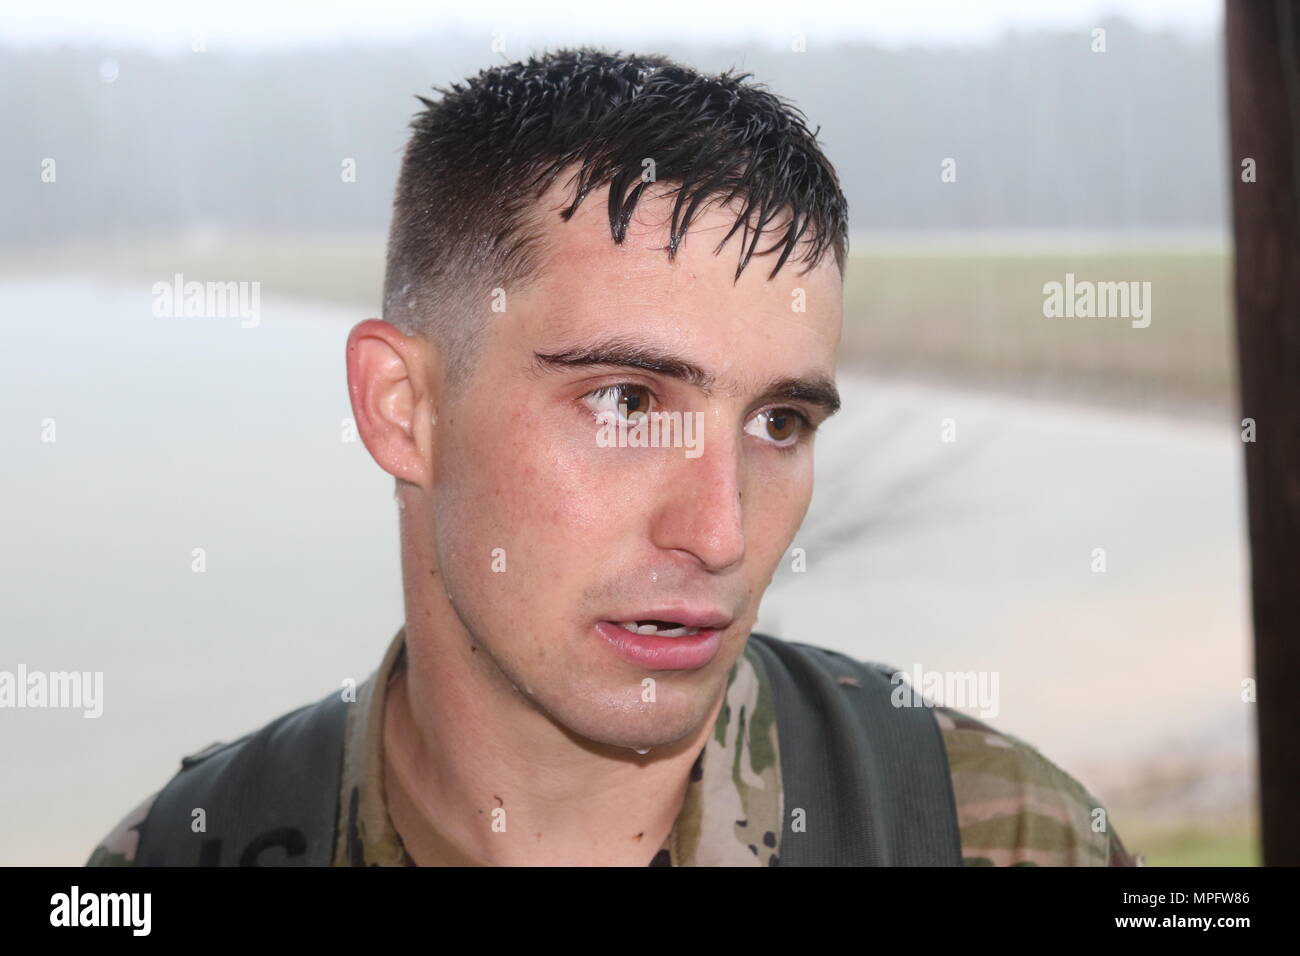 Sgt. Austin Eubanks, 287th Engineer Company based in Lucedale, Miss., recovers after conducting a land navigation course in a torrential downpour during the Mississippi National Guard’s 2017 Best Warrior Competition at Camp McCain near Elliott, Miss., March 7, 2017. (Mississippi National Guard photo by Staff Sgt. Scott Tynes, 102d Public Affairs Detachment) Stock Photo